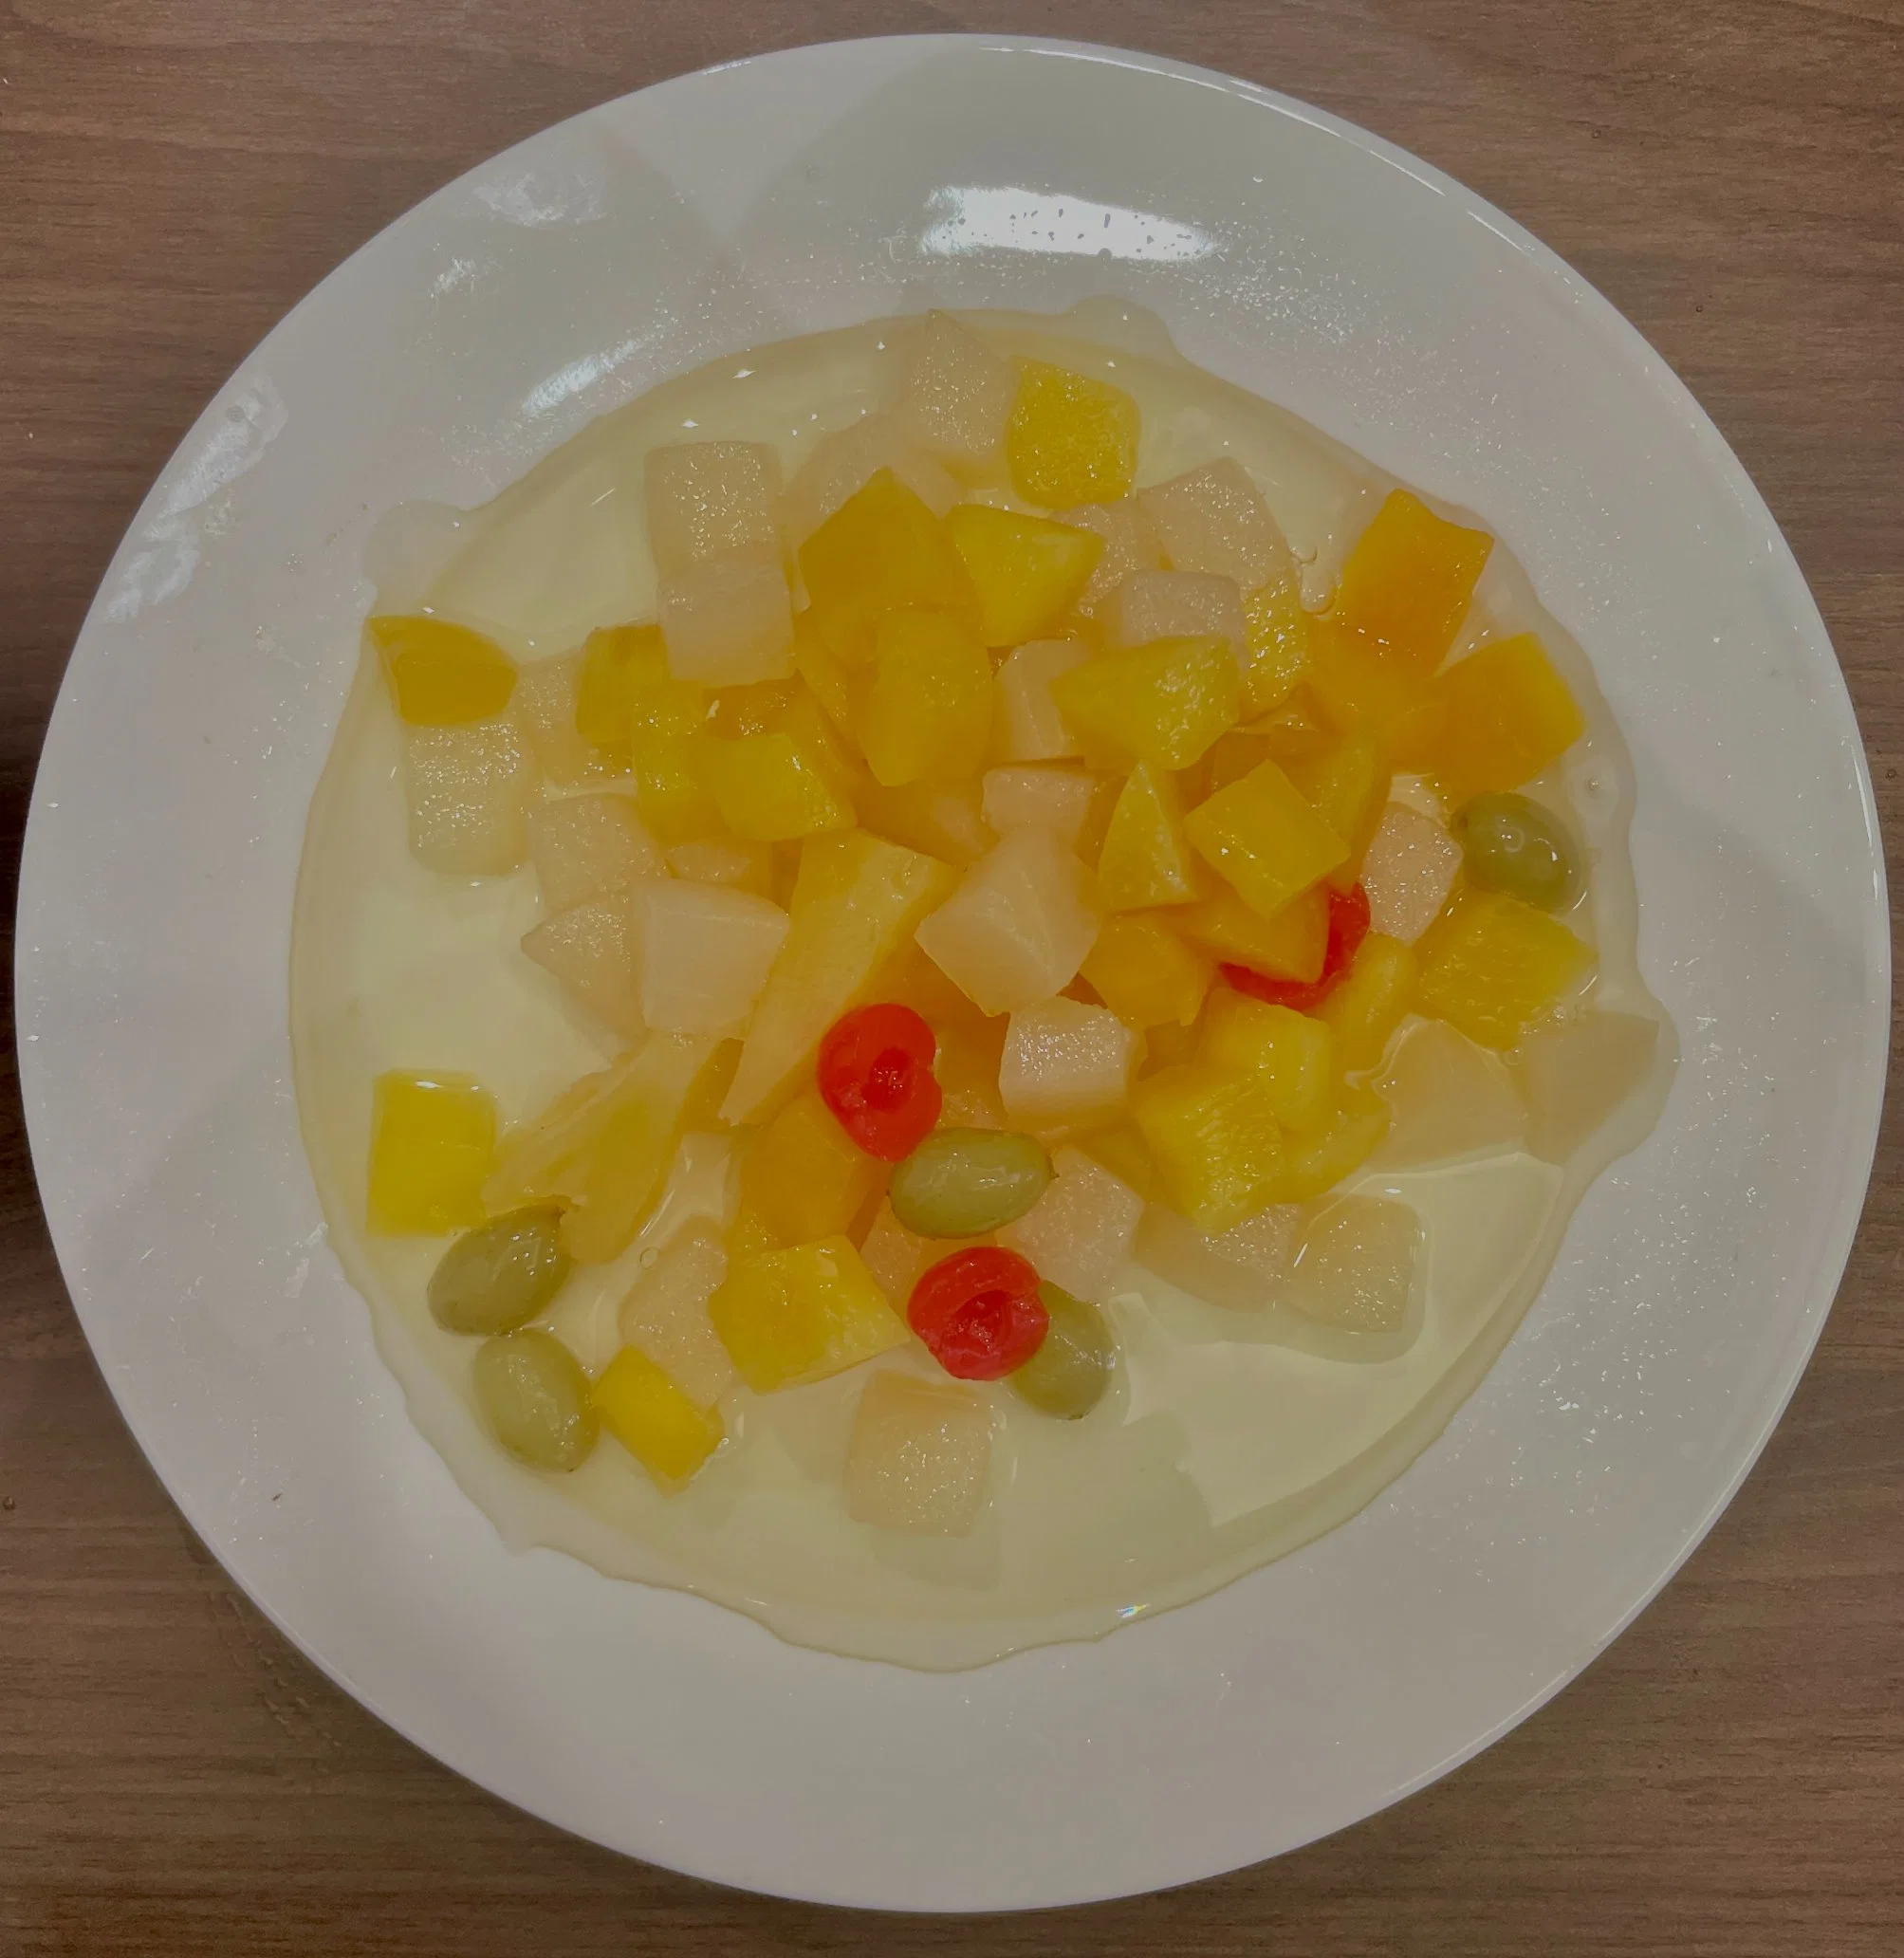 820 G 425 G Canned Fruit Salad in Light Syrup Fruit Cocktail